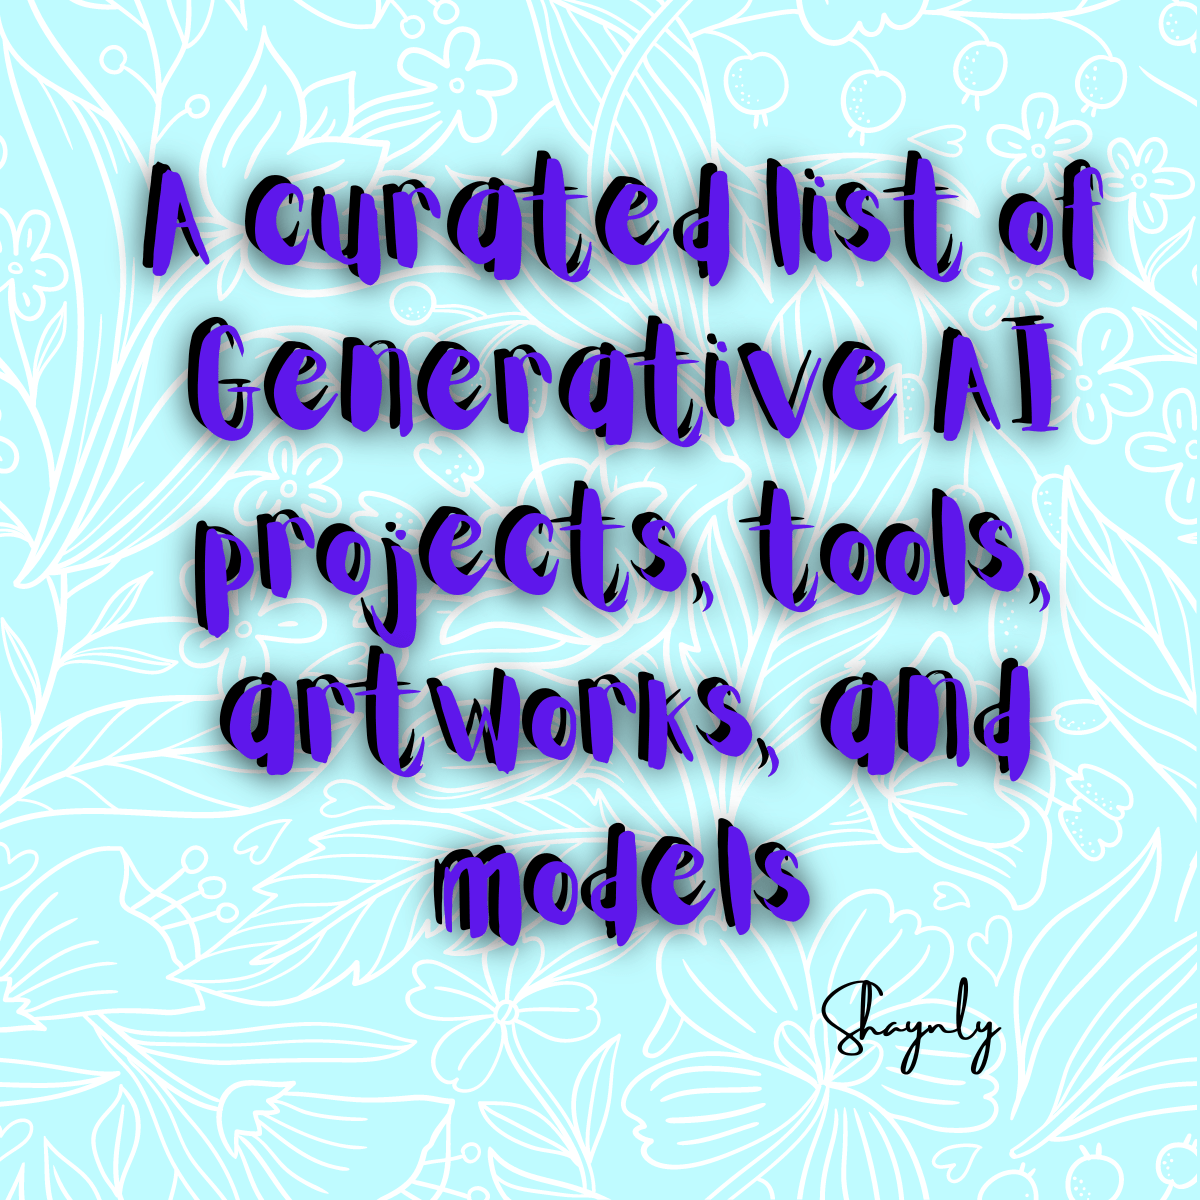 A-curated-list-of-Generative-AI-projects-tools-artworks-and-models.png